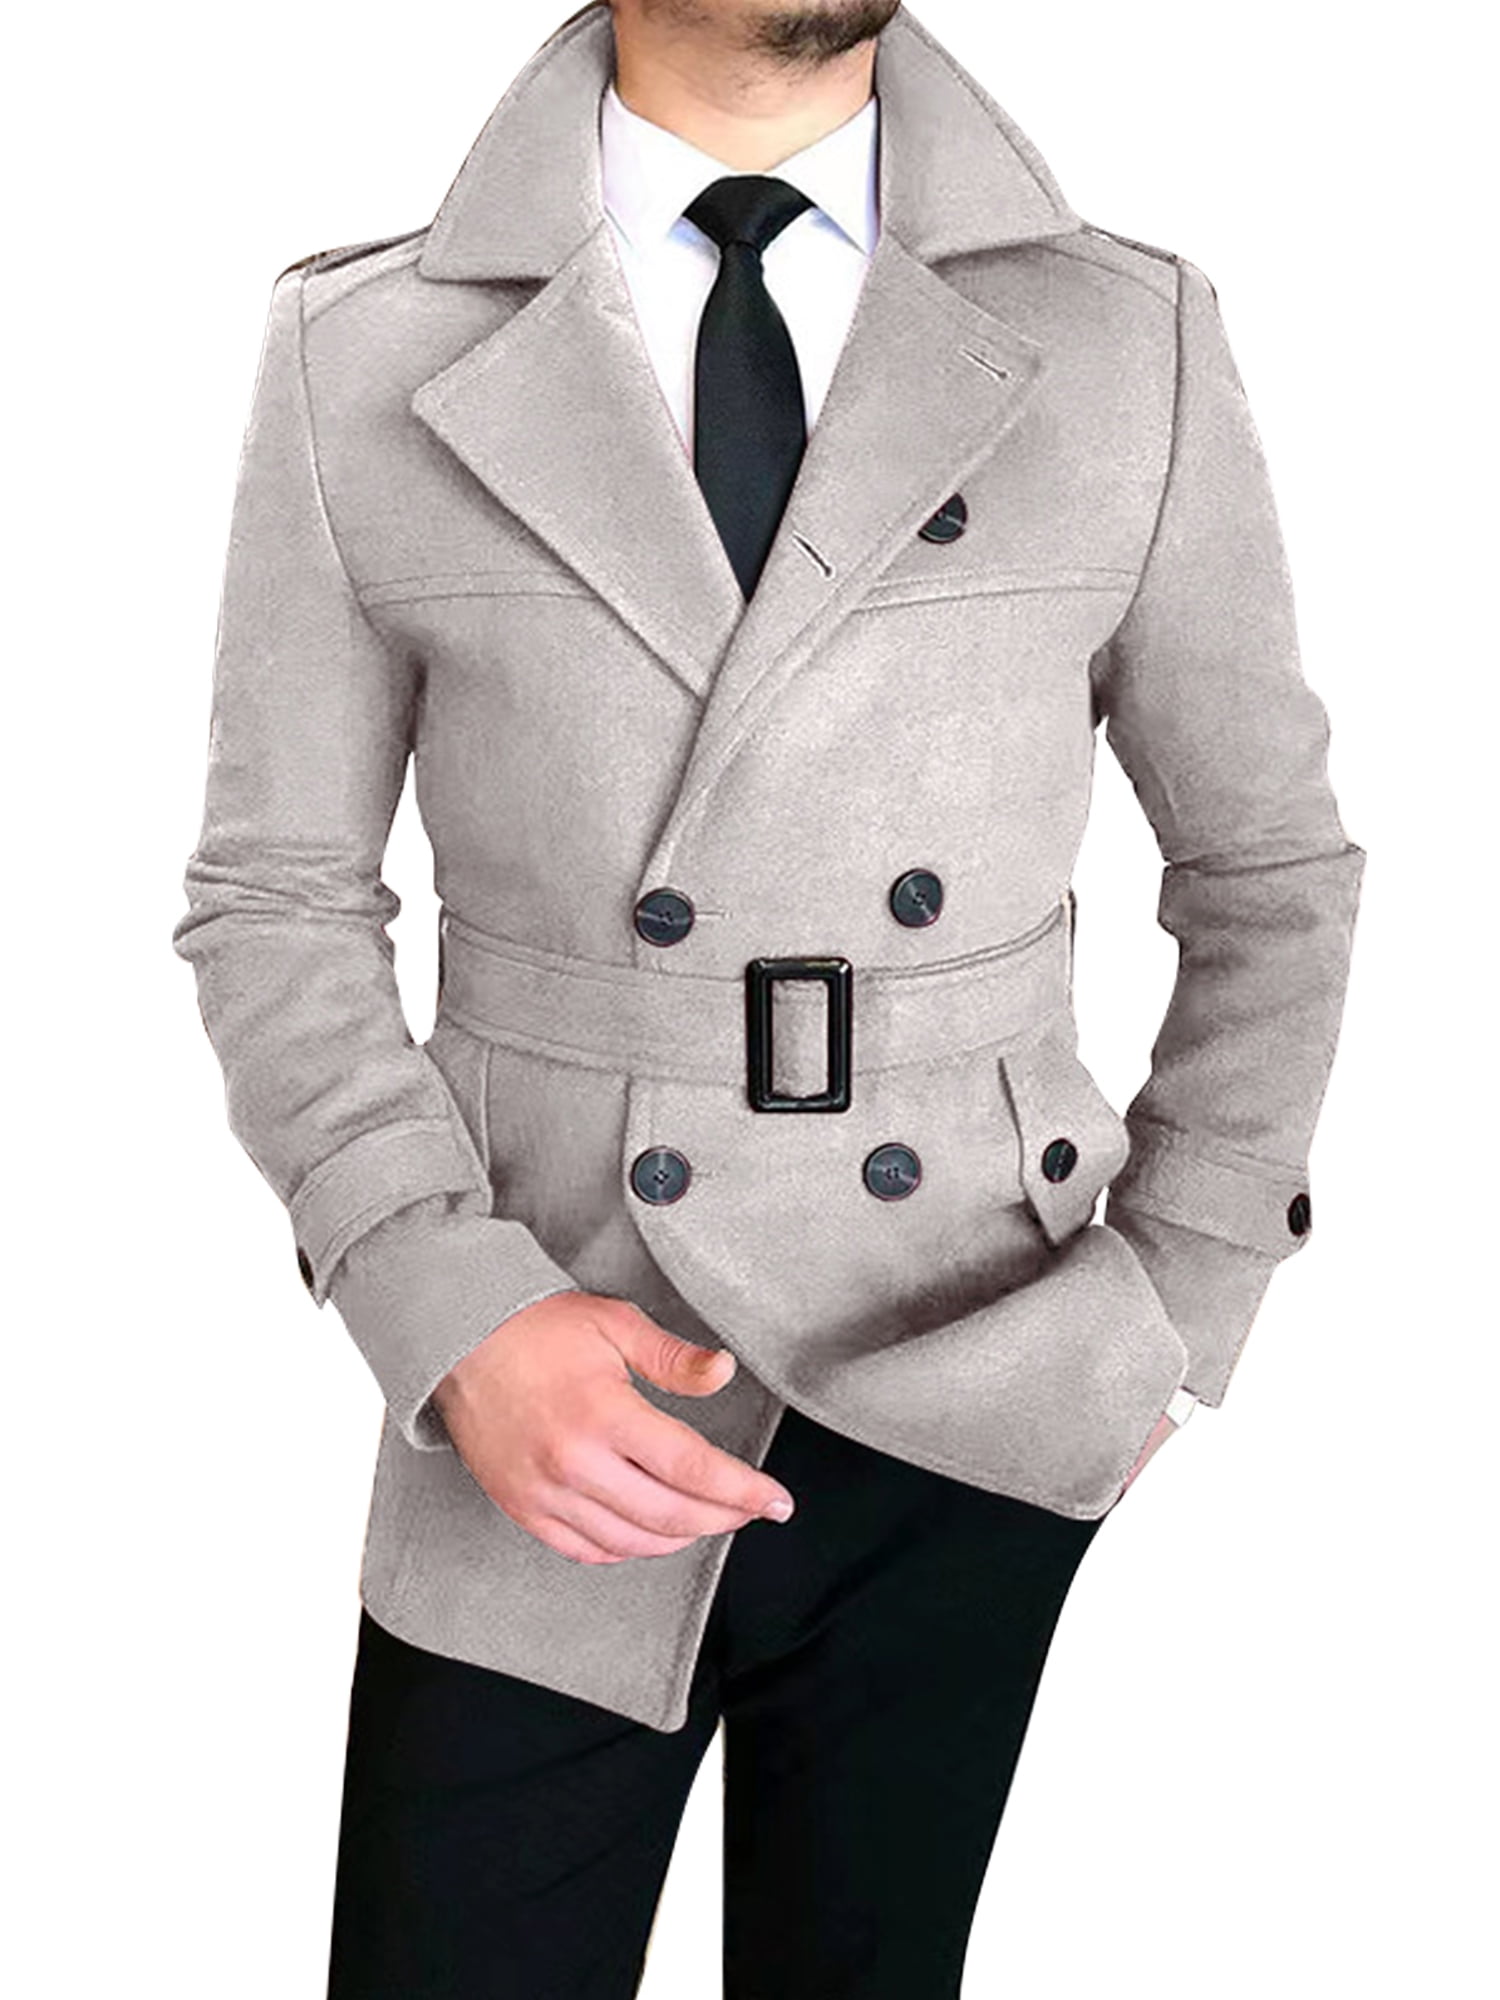 Mens Woolen Jacket Double Breasted Military Officer Trench Coat Outwear  Overcoat